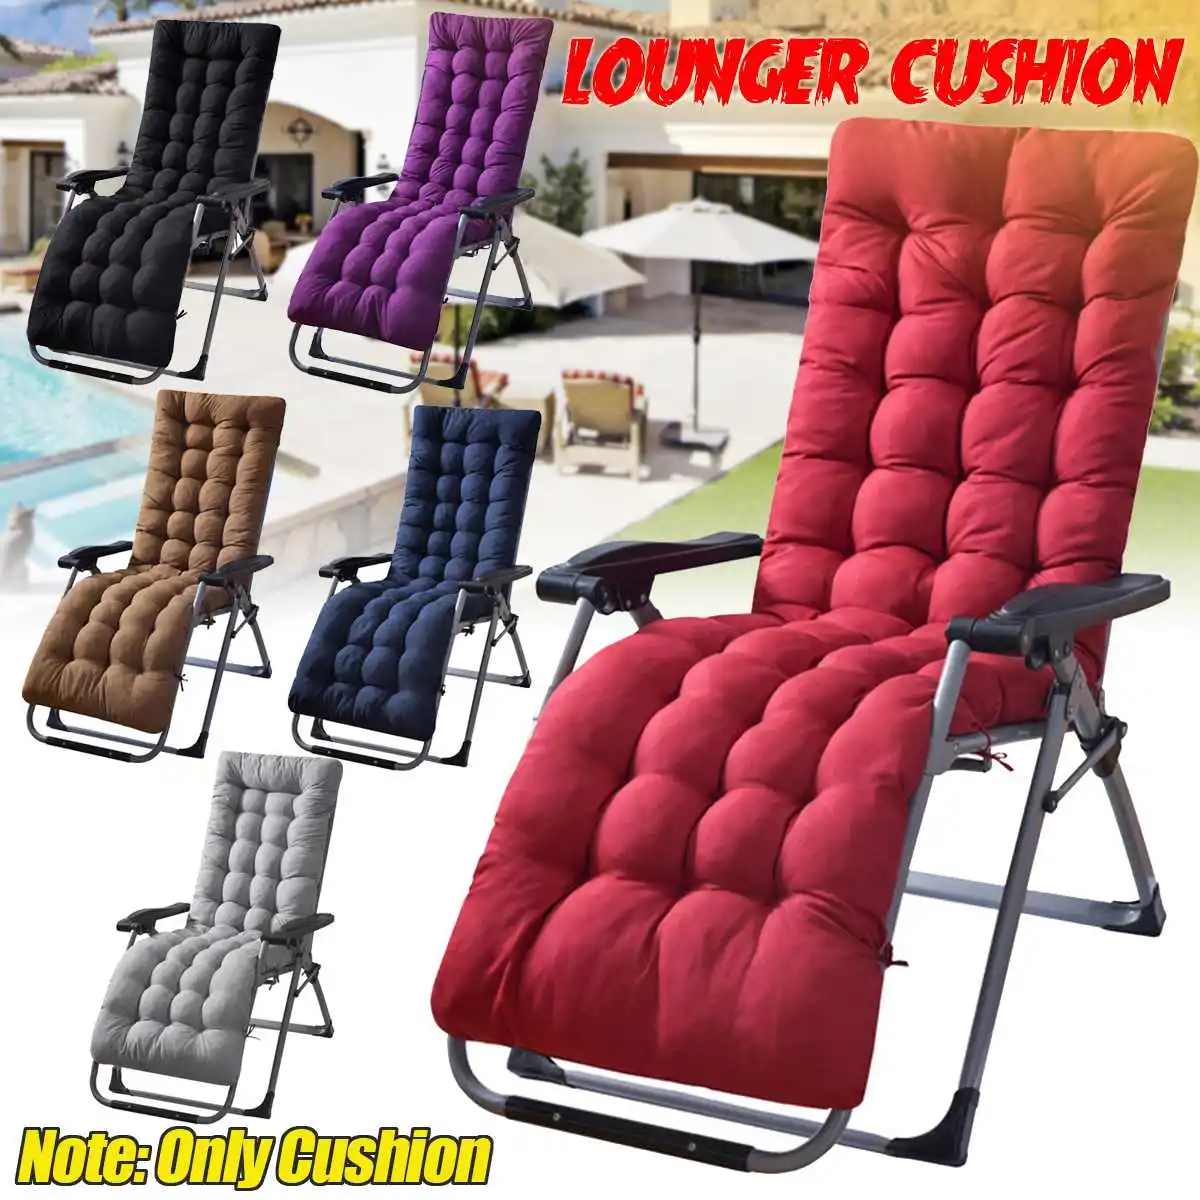 Cushion Pad Lounger Recliner Chair Garden Cotton Seat Home Lounge Pads Soft Size 